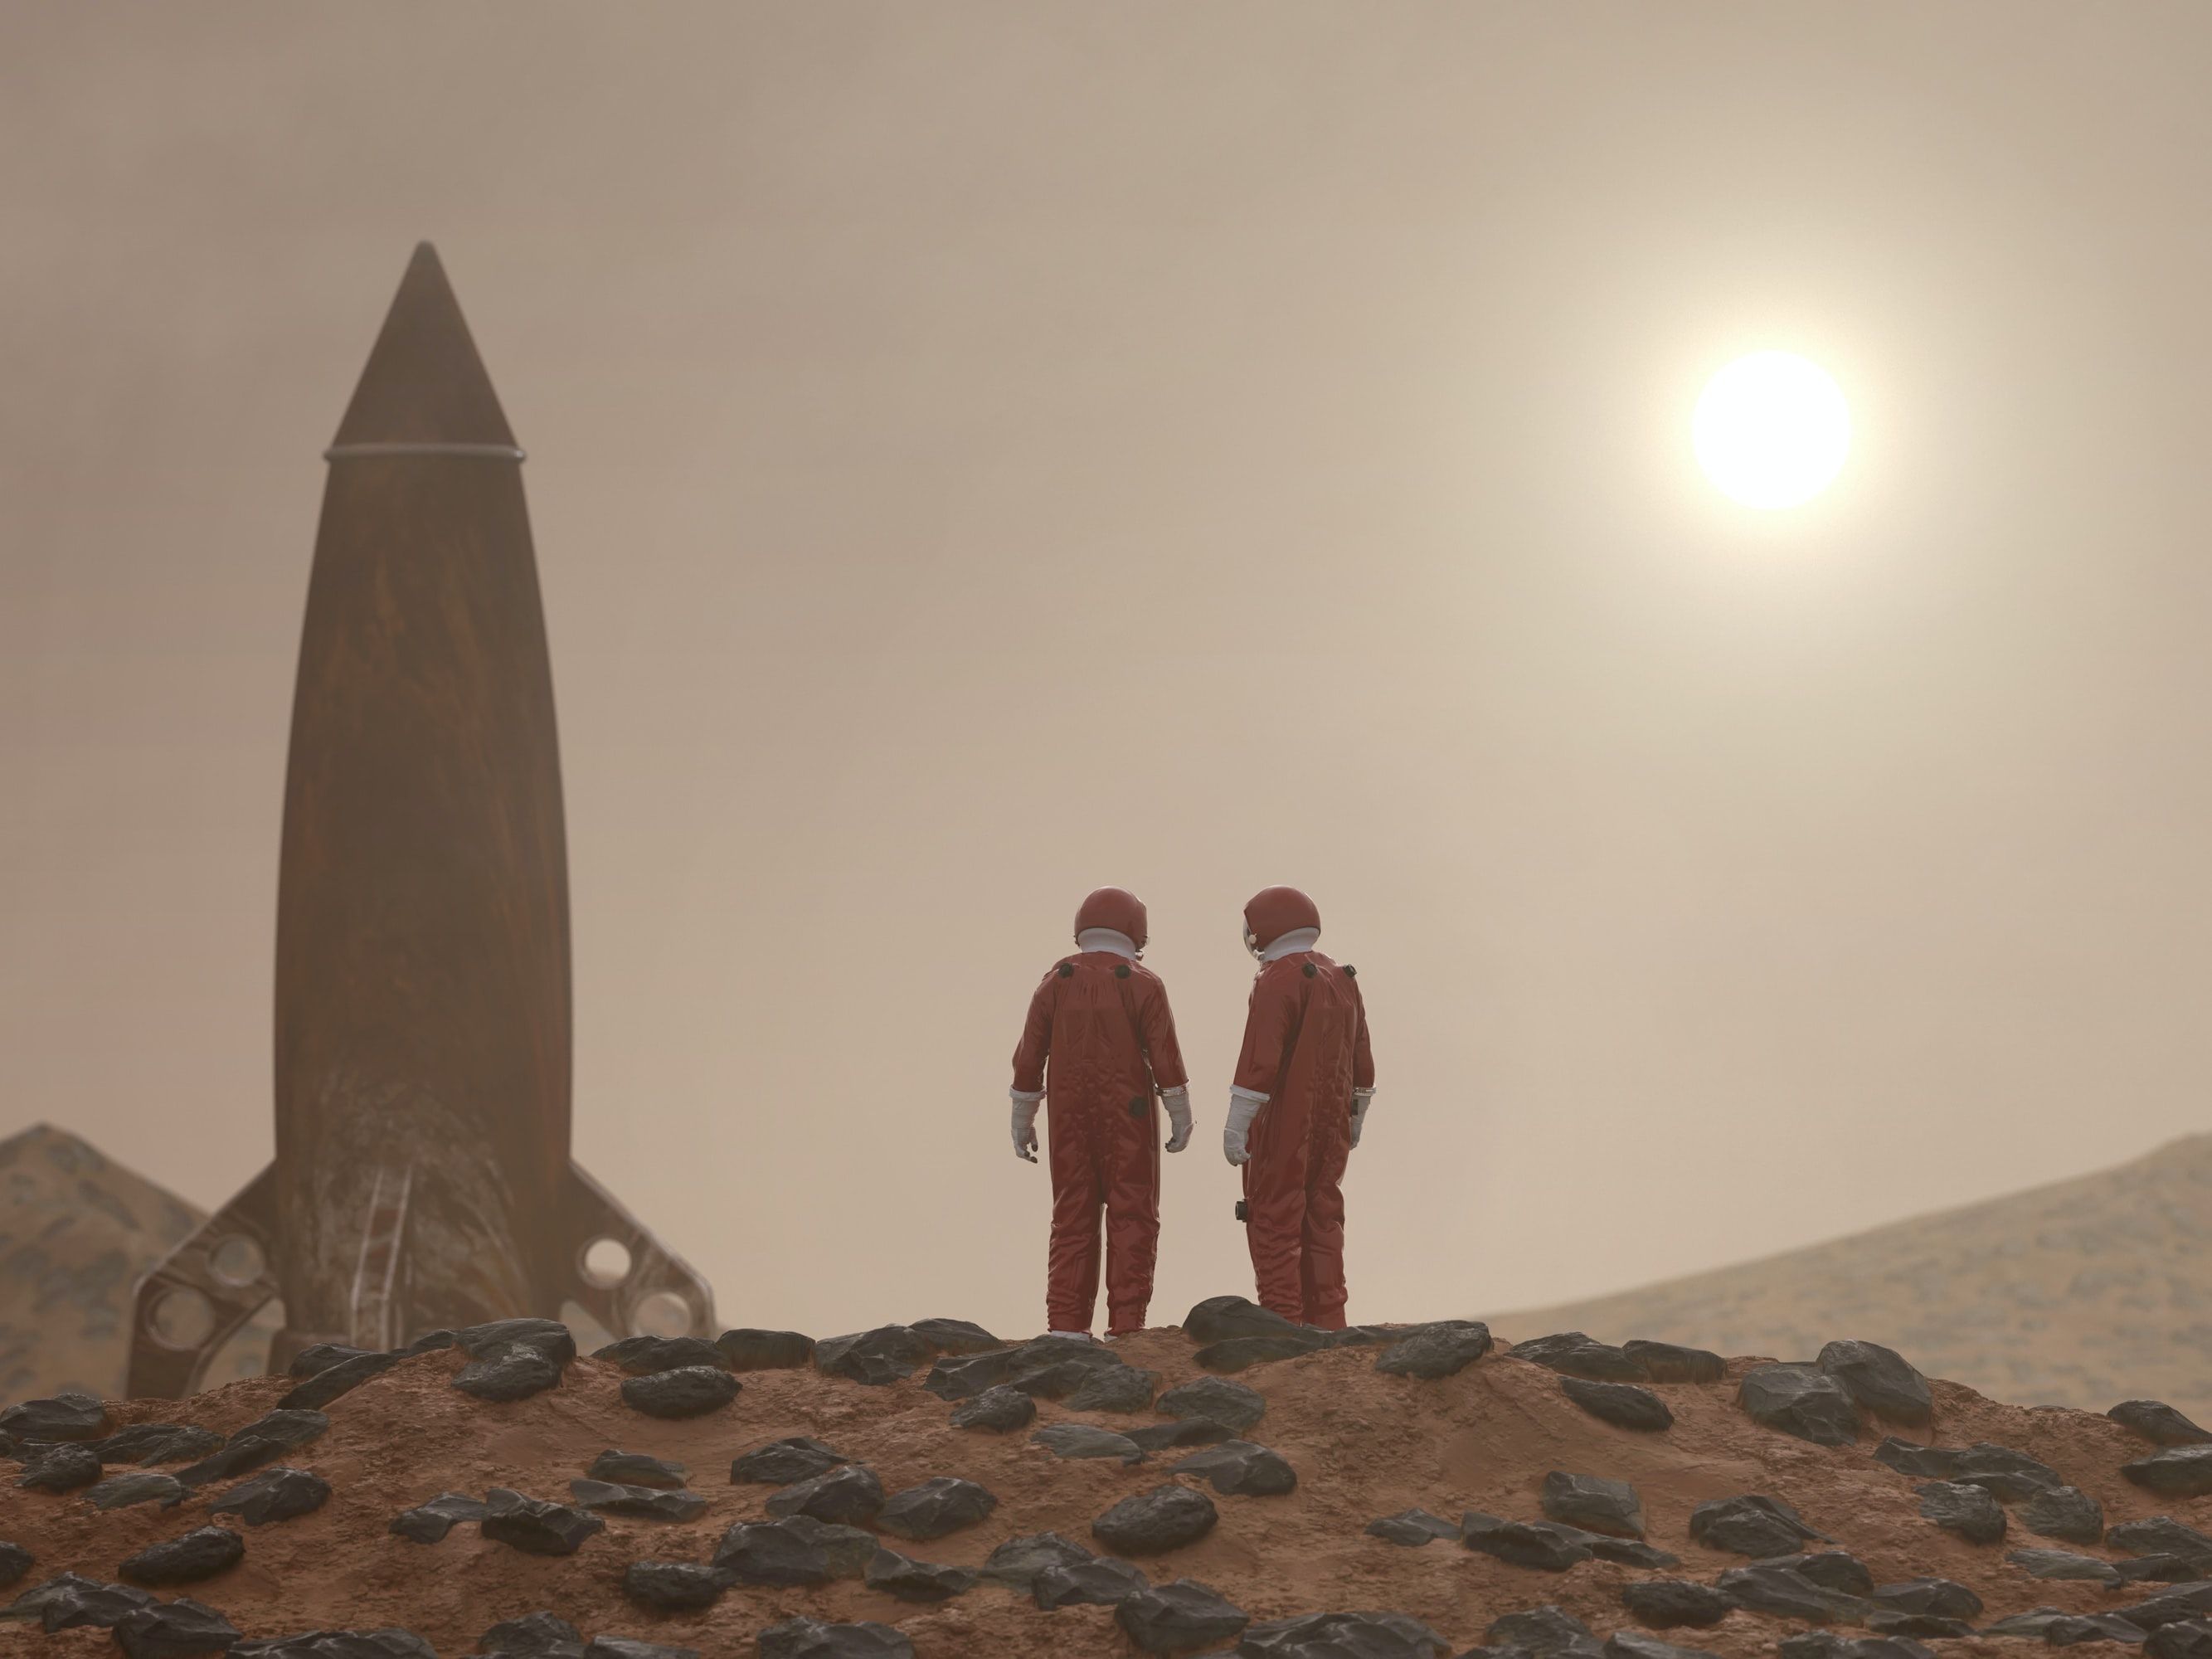 Two people standing on Mars